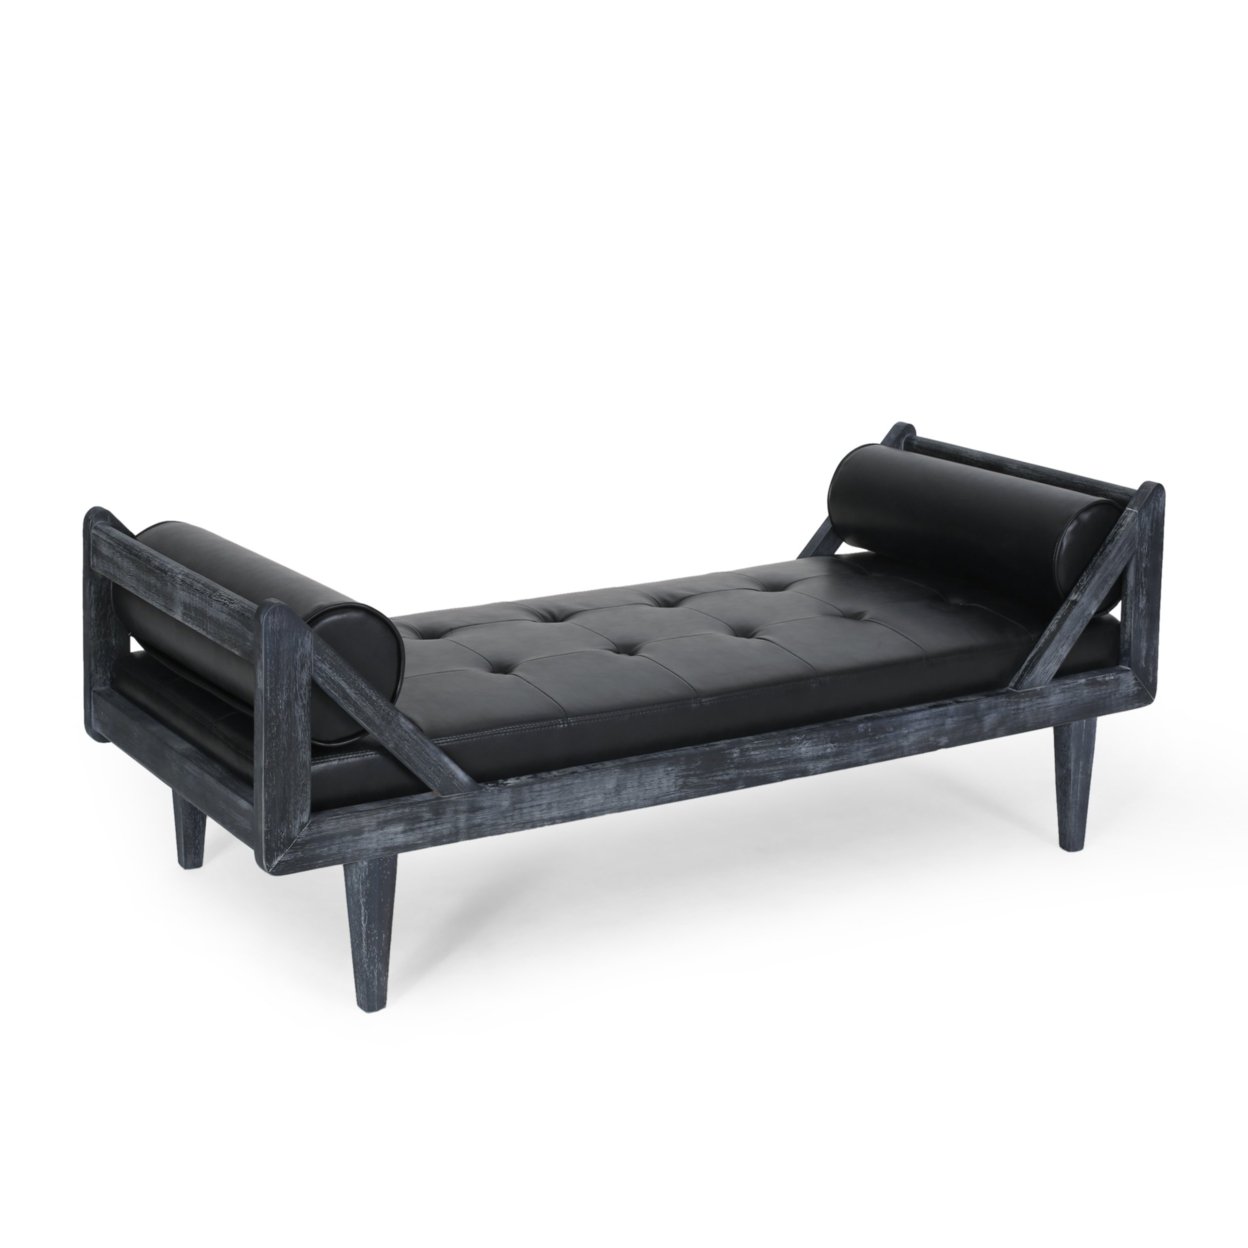 Huller Rustic Tufted Double End Chaise Lounge With Bolster Pillows - Midnight